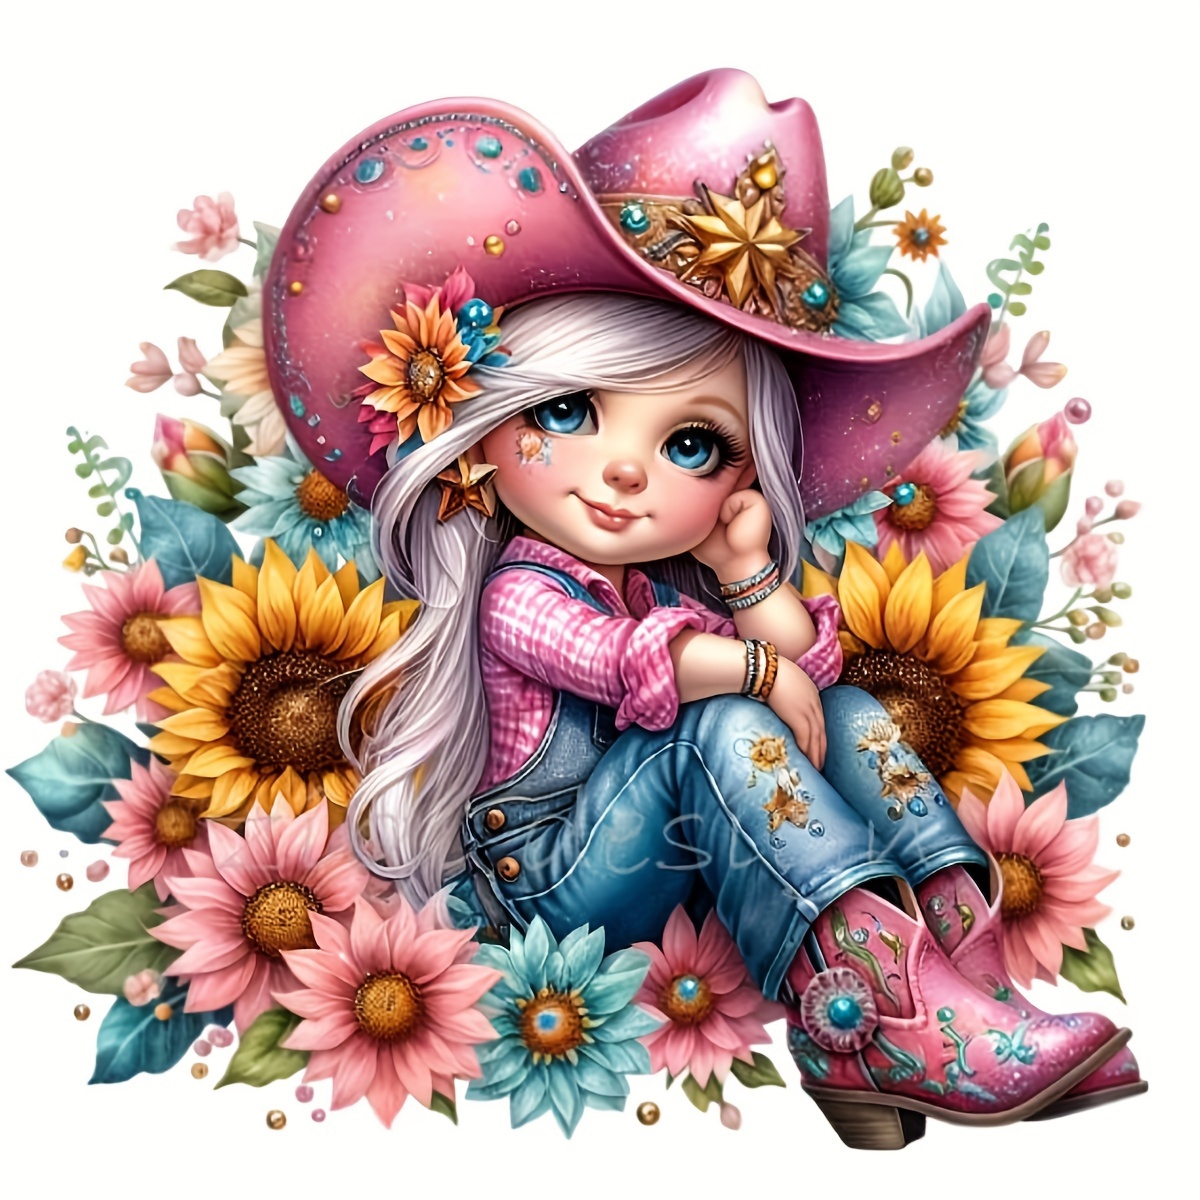 

Sunflower & Western Cowboy 5d Diamond Painting Kit For Adults - Diy Round Full Drill Art, Acrylic Gems Craft Set For Beginners, Home Wall Decor Gift